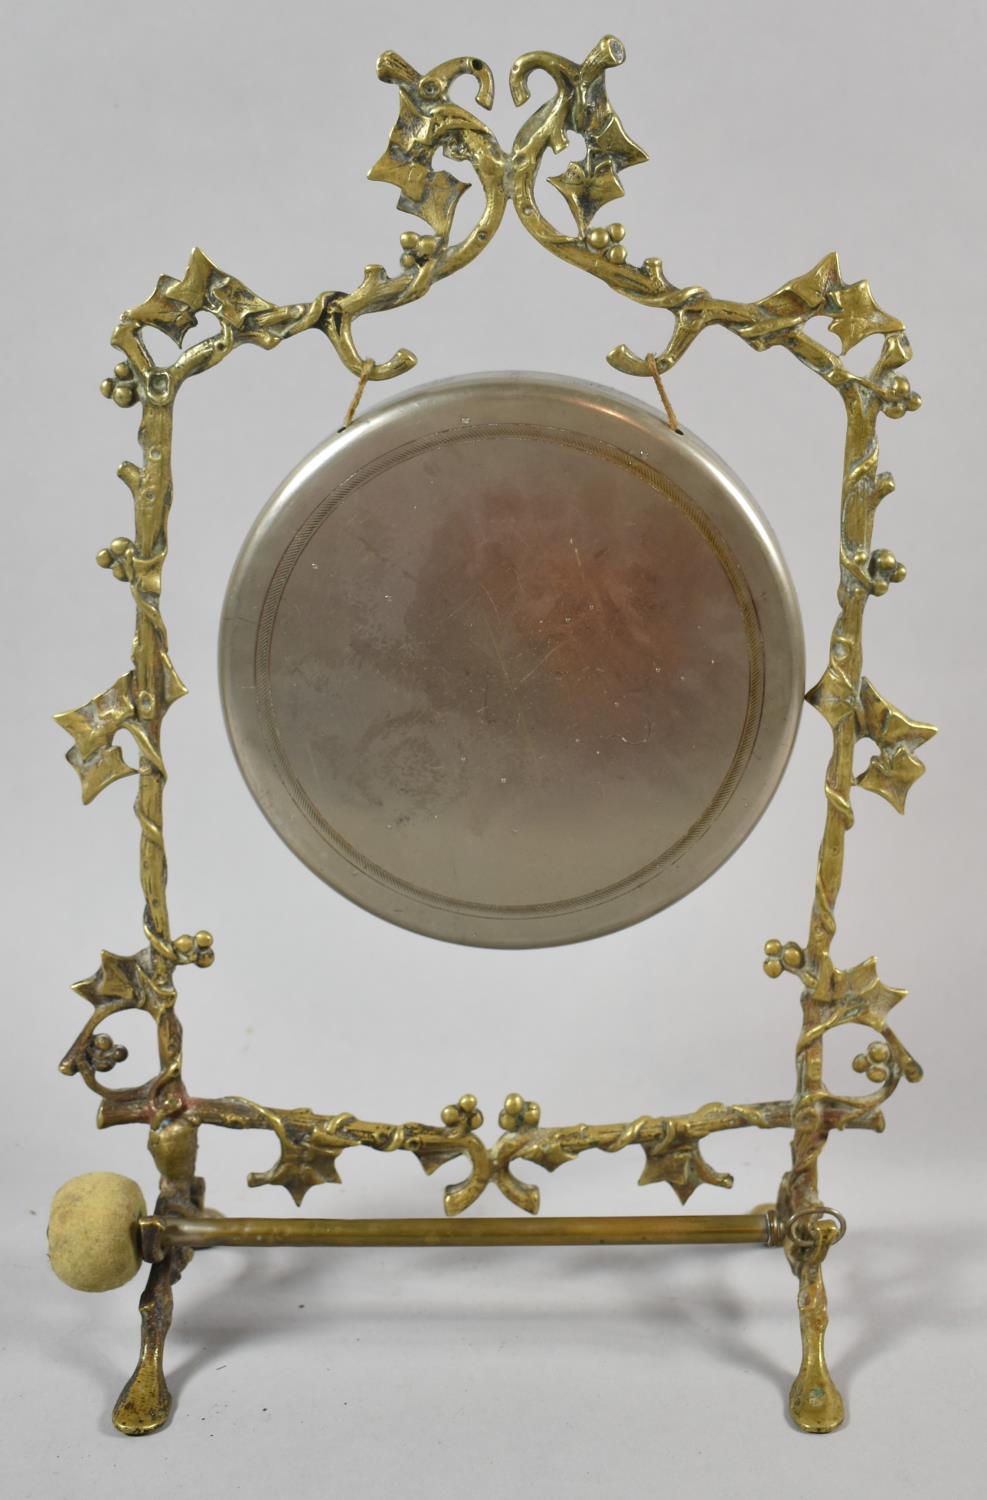 A Brass Table Gong with Clapper, the Frame in the Form of Vine, 36cm High